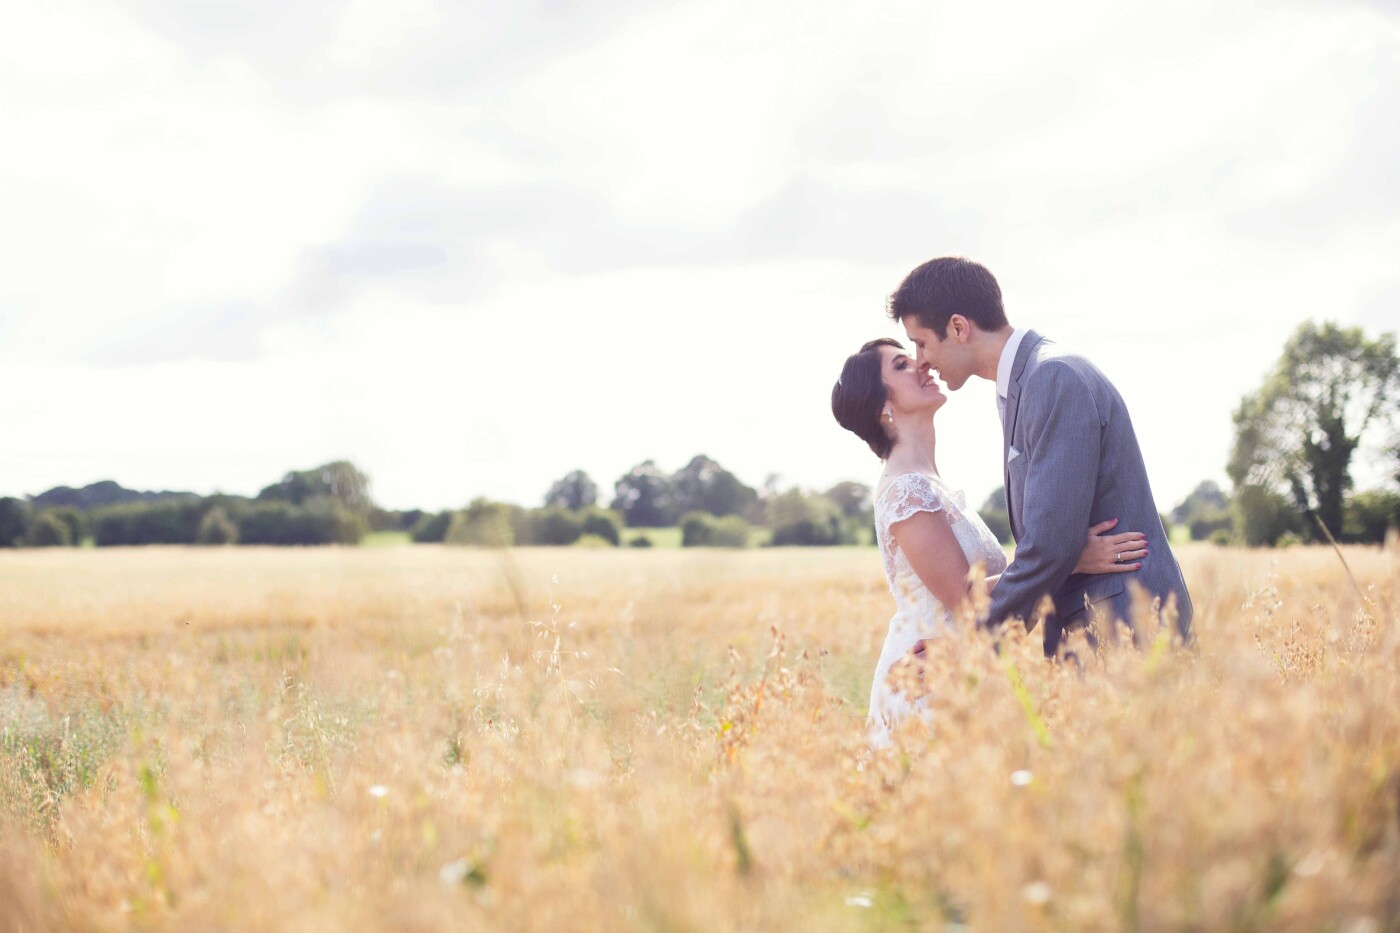 Helena and Lennard are a gorgeous couple. Helena is Brazilian and Lennard is Dutch, they met in Uruguay and got married in Ireland. After the ceremony we went to the hotel grounds for some photos and on the way we spotted this beautiful golden field. I asked them if they would like to stop and go in for a few photos and without hesitating they said yes. When they leaned in for a kiss the sun came out and made the moment magical. 